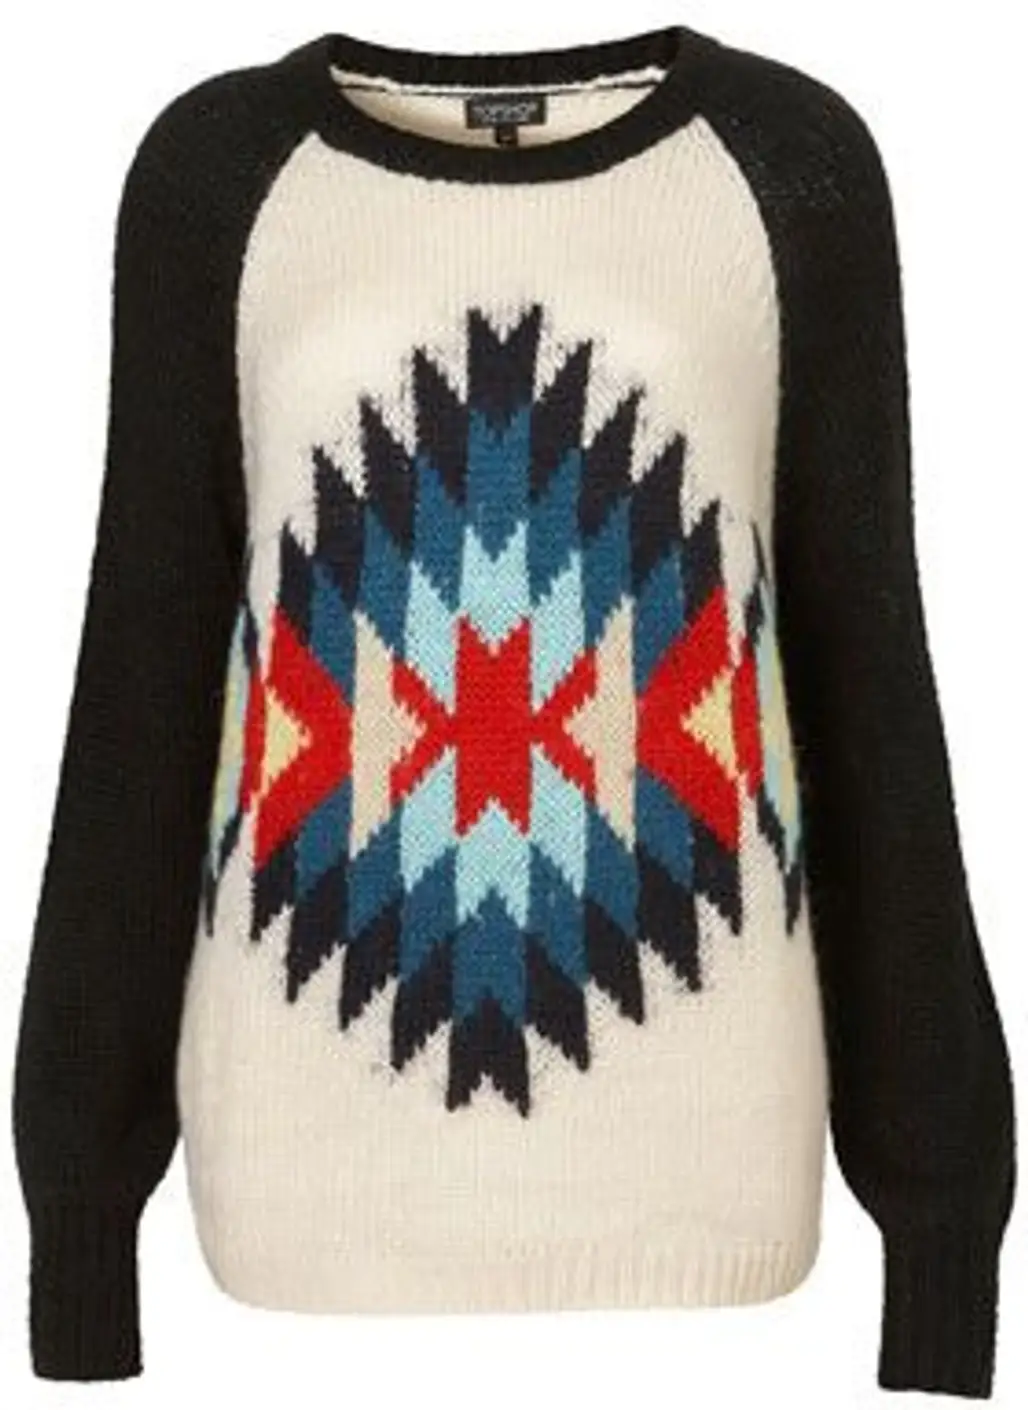 Topshop Knitted Aztec Motif Sweater